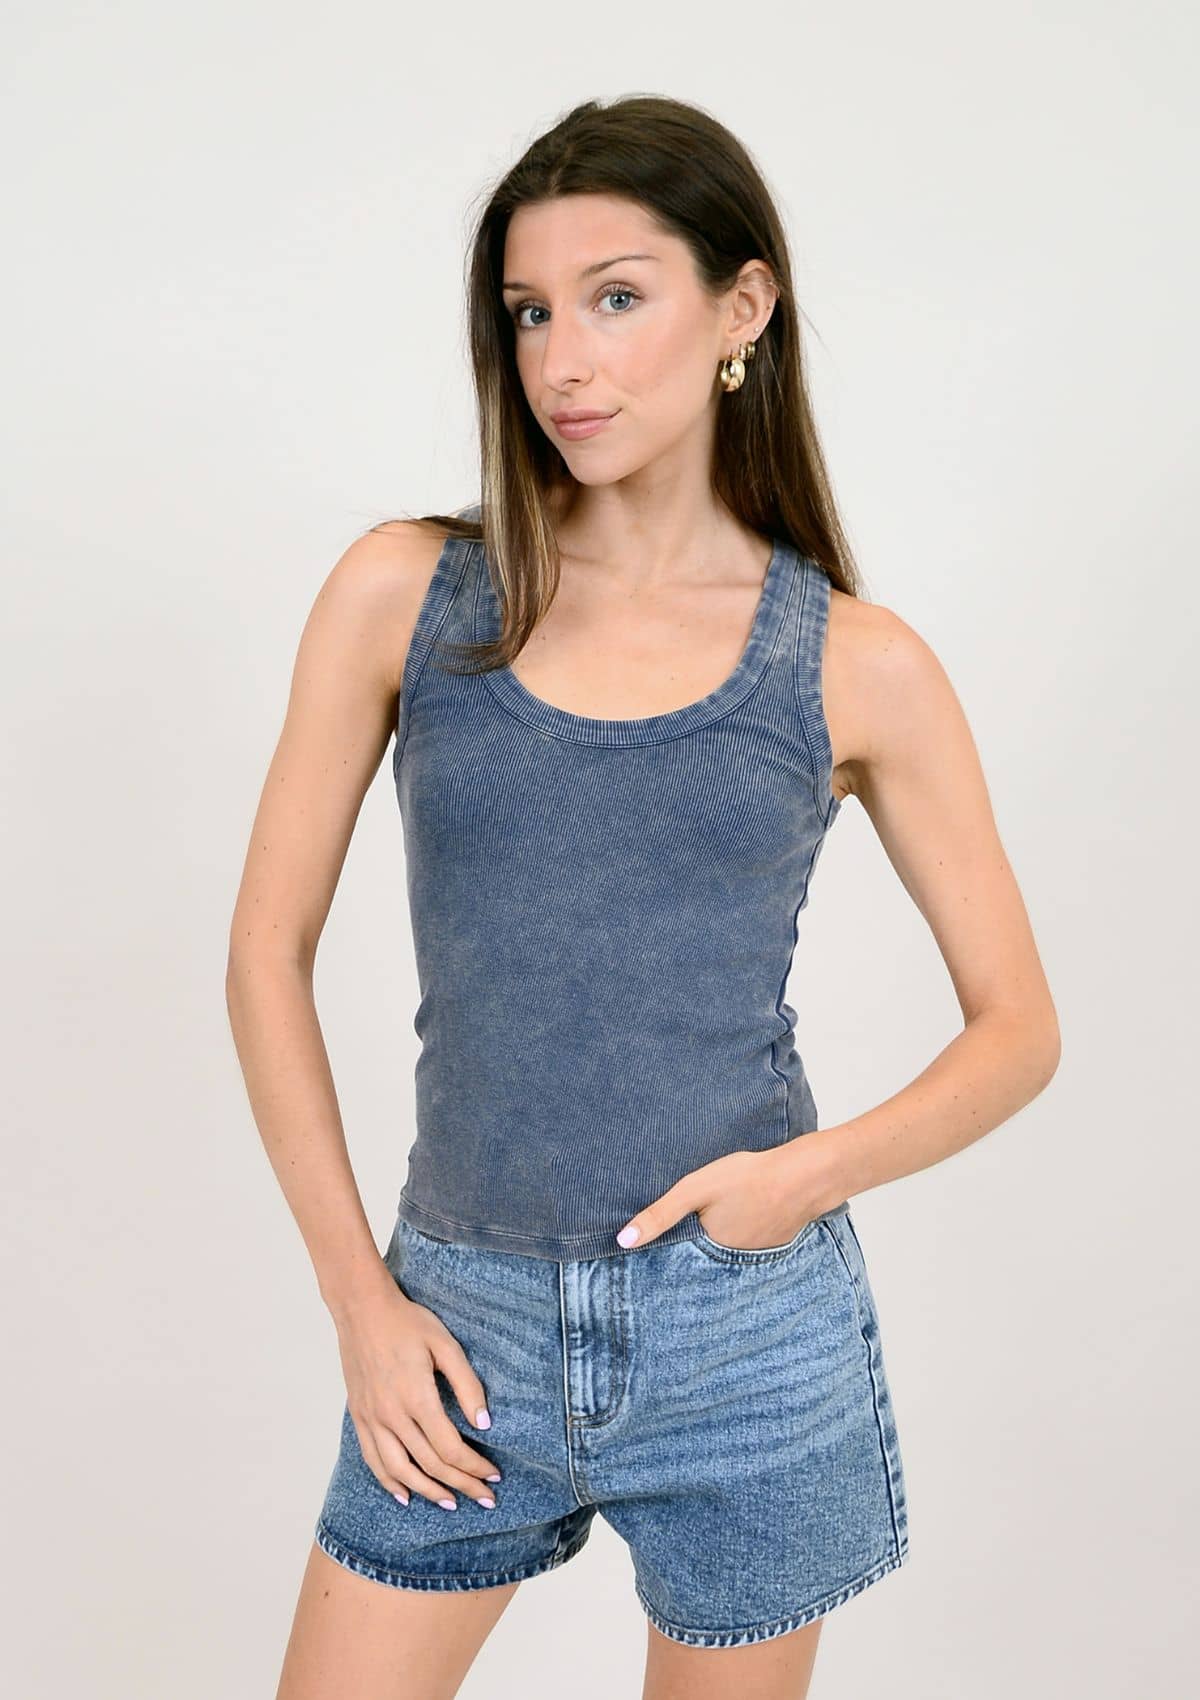 Casual Tops-clothing-Fashion-Ruby Jane.